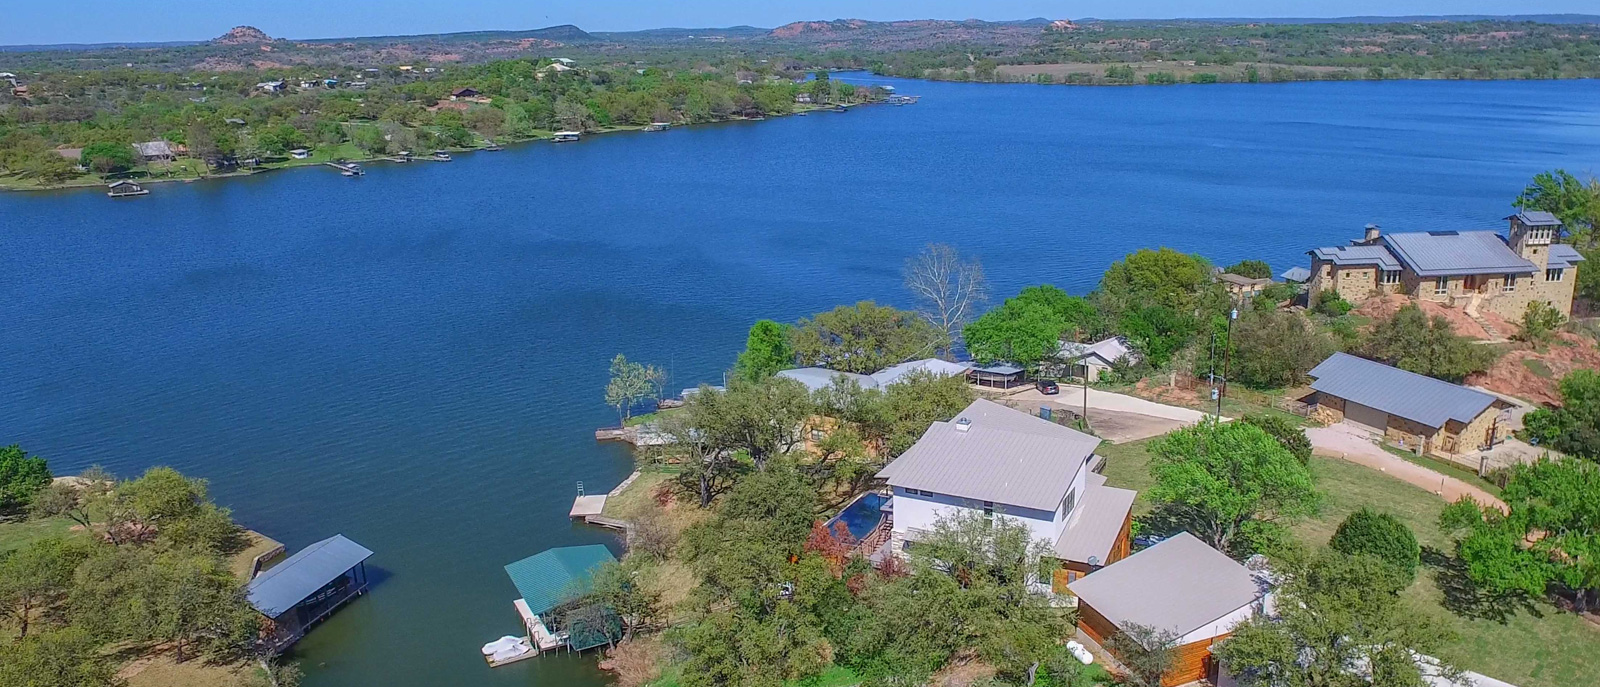 Waterfront Homes | Texas Hill Country, Texas | Lake Land Realty